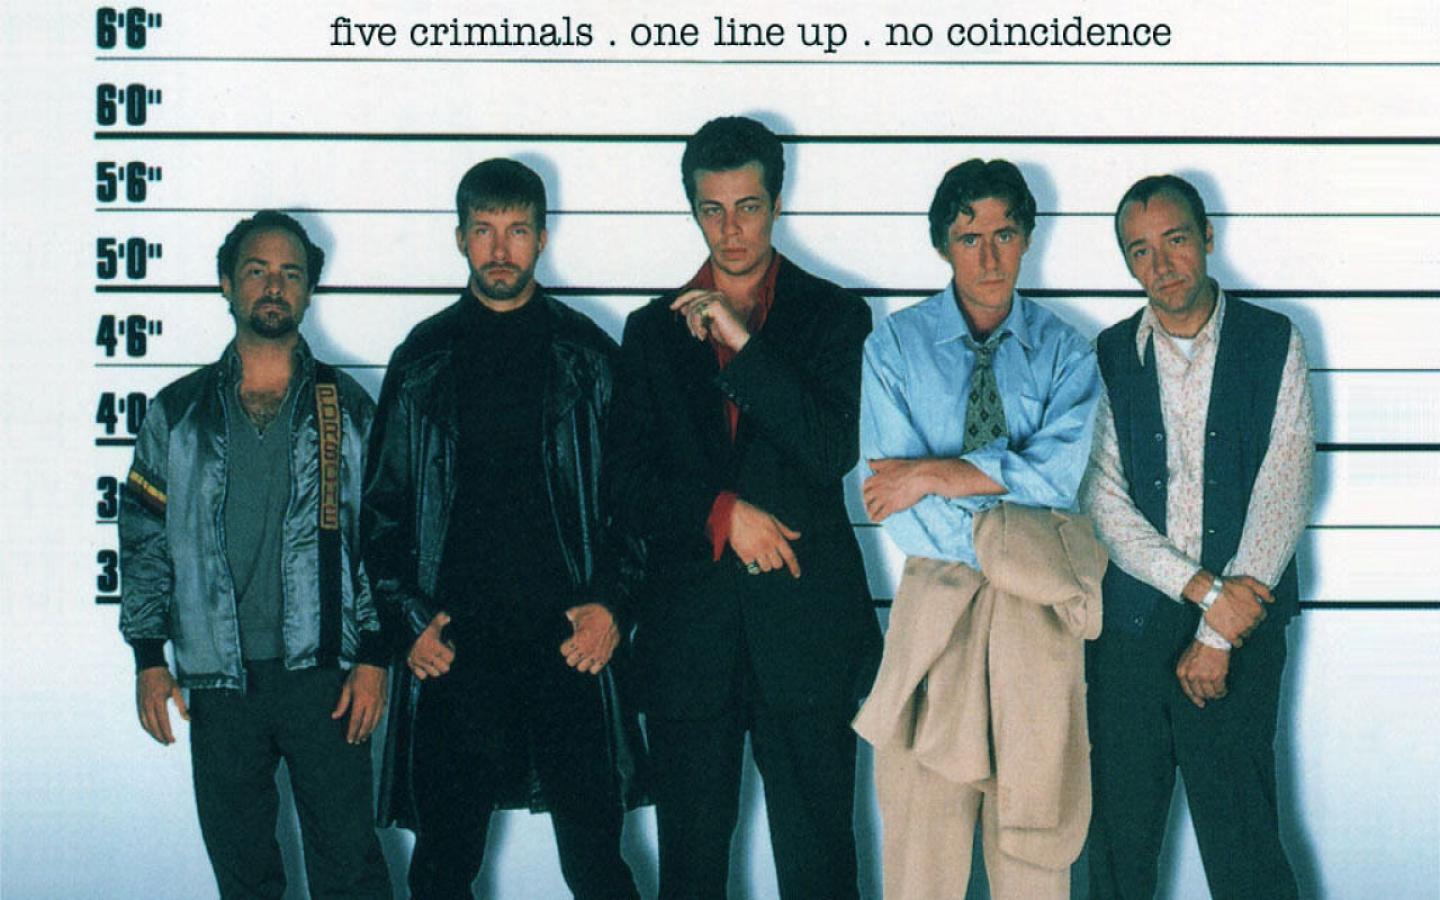 The Usual Suspects Wallpaper #1 1440 x 900 